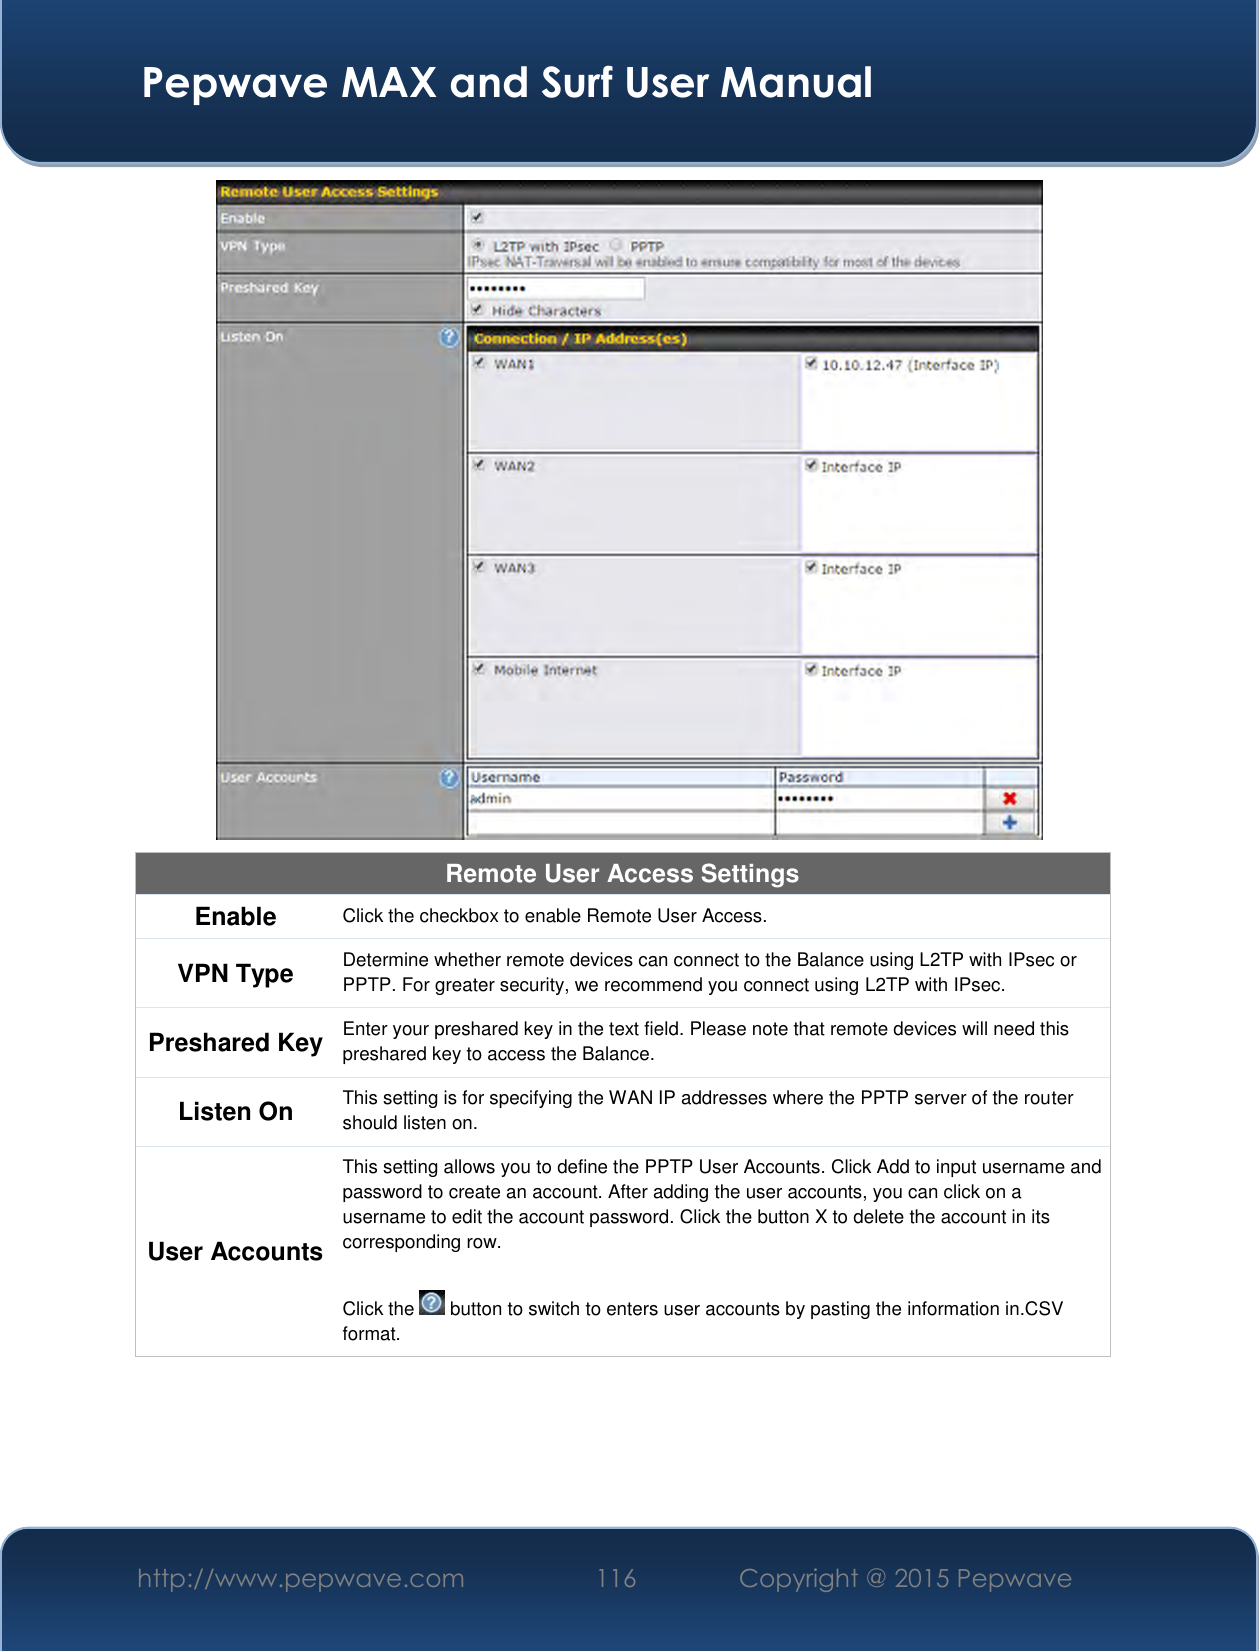  Pepwave MAX and Surf User Manual http://www.pepwave.com 116   Copyright @ 2015 Pepwave    Remote User Access Settings Enable Click the checkbox to enable Remote User Access. VPN Type Determine whether remote devices can connect to the Balance using L2TP with IPsec or PPTP. For greater security, we recommend you connect using L2TP with IPsec. Preshared Key Enter your preshared key in the text field. Please note that remote devices will need this preshared key to access the Balance. Listen On This setting is for specifying the WAN IP addresses where the PPTP server of the router should listen on. User Accounts This setting allows you to define the PPTP User Accounts. Click Add to input username and password to create an account. After adding the user accounts, you can click on a username to edit the account password. Click the button X to delete the account in its corresponding row.  Click the   button to switch to enters user accounts by pasting the information in.CSV format.  